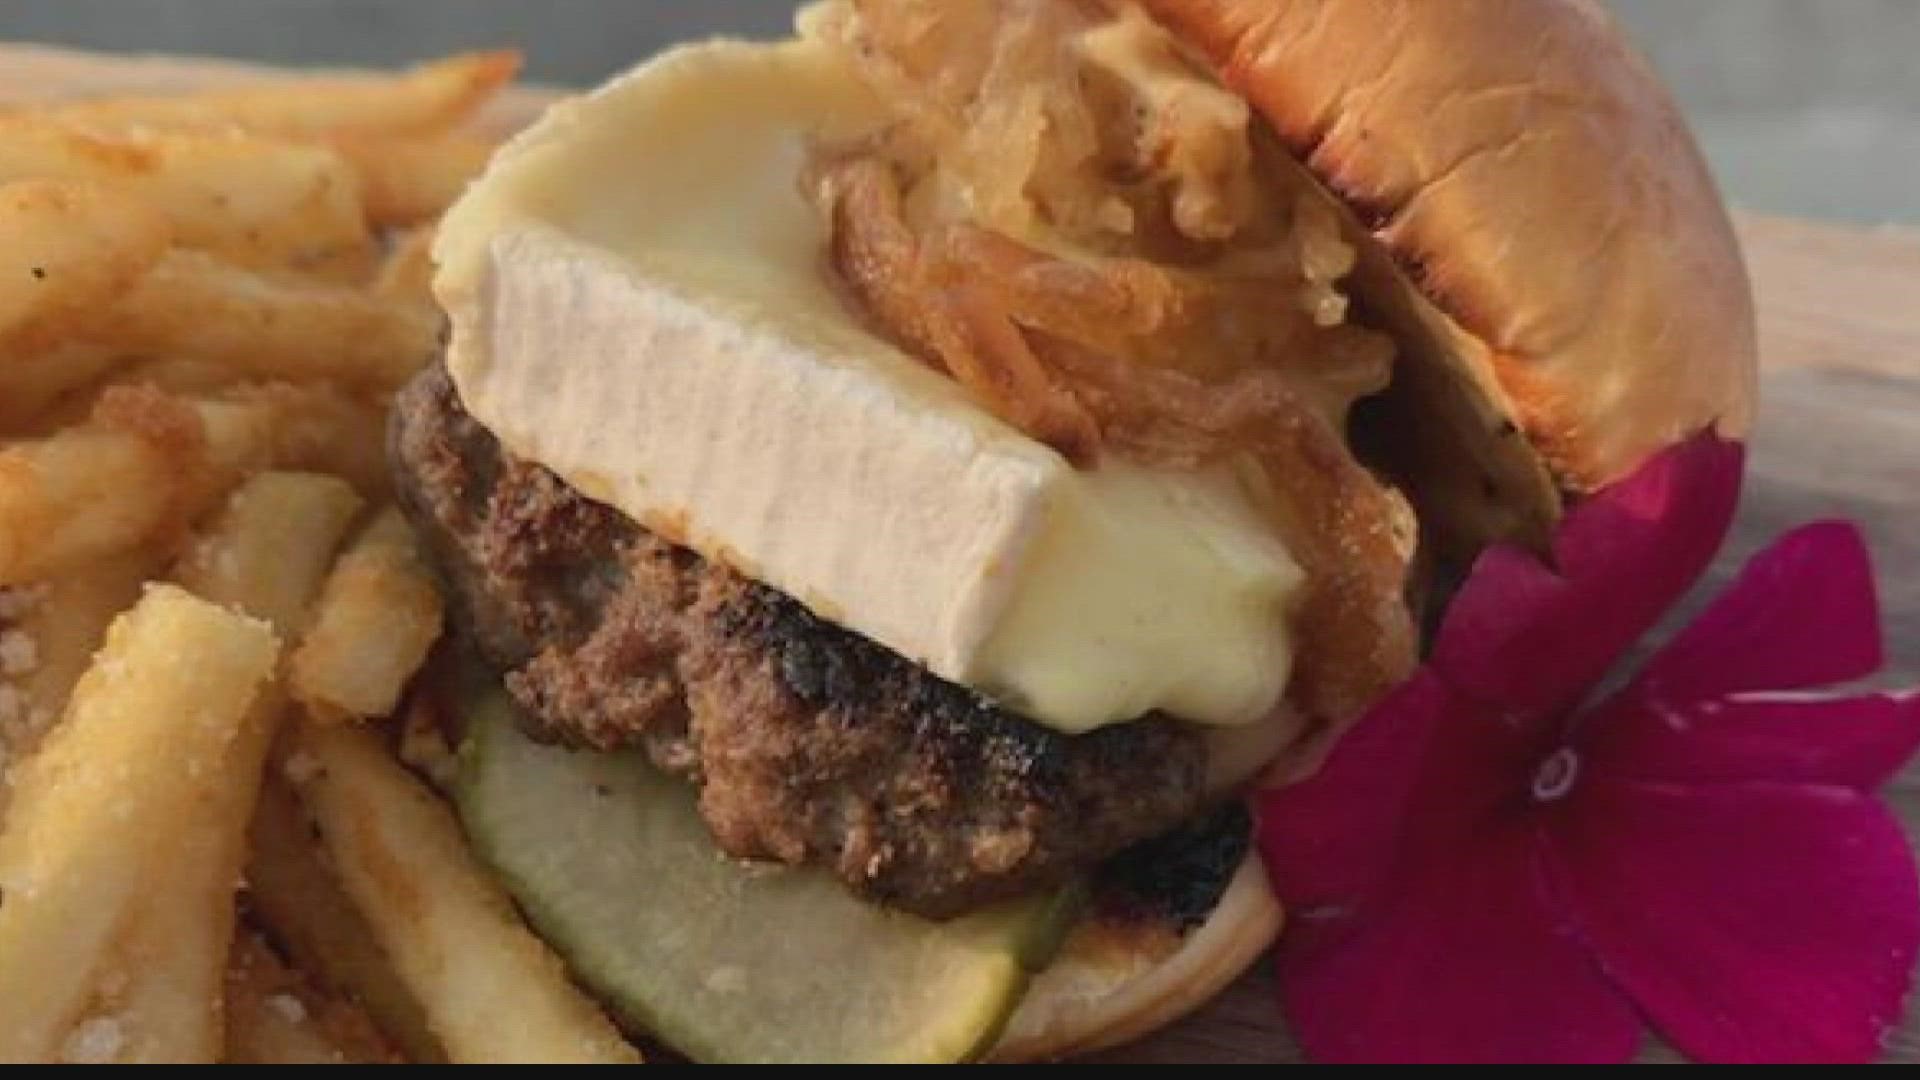 All this week, Hoosiers have been helping decide who has the best burger in Central Indiana. And the winner is revealed only here on Sunrise.